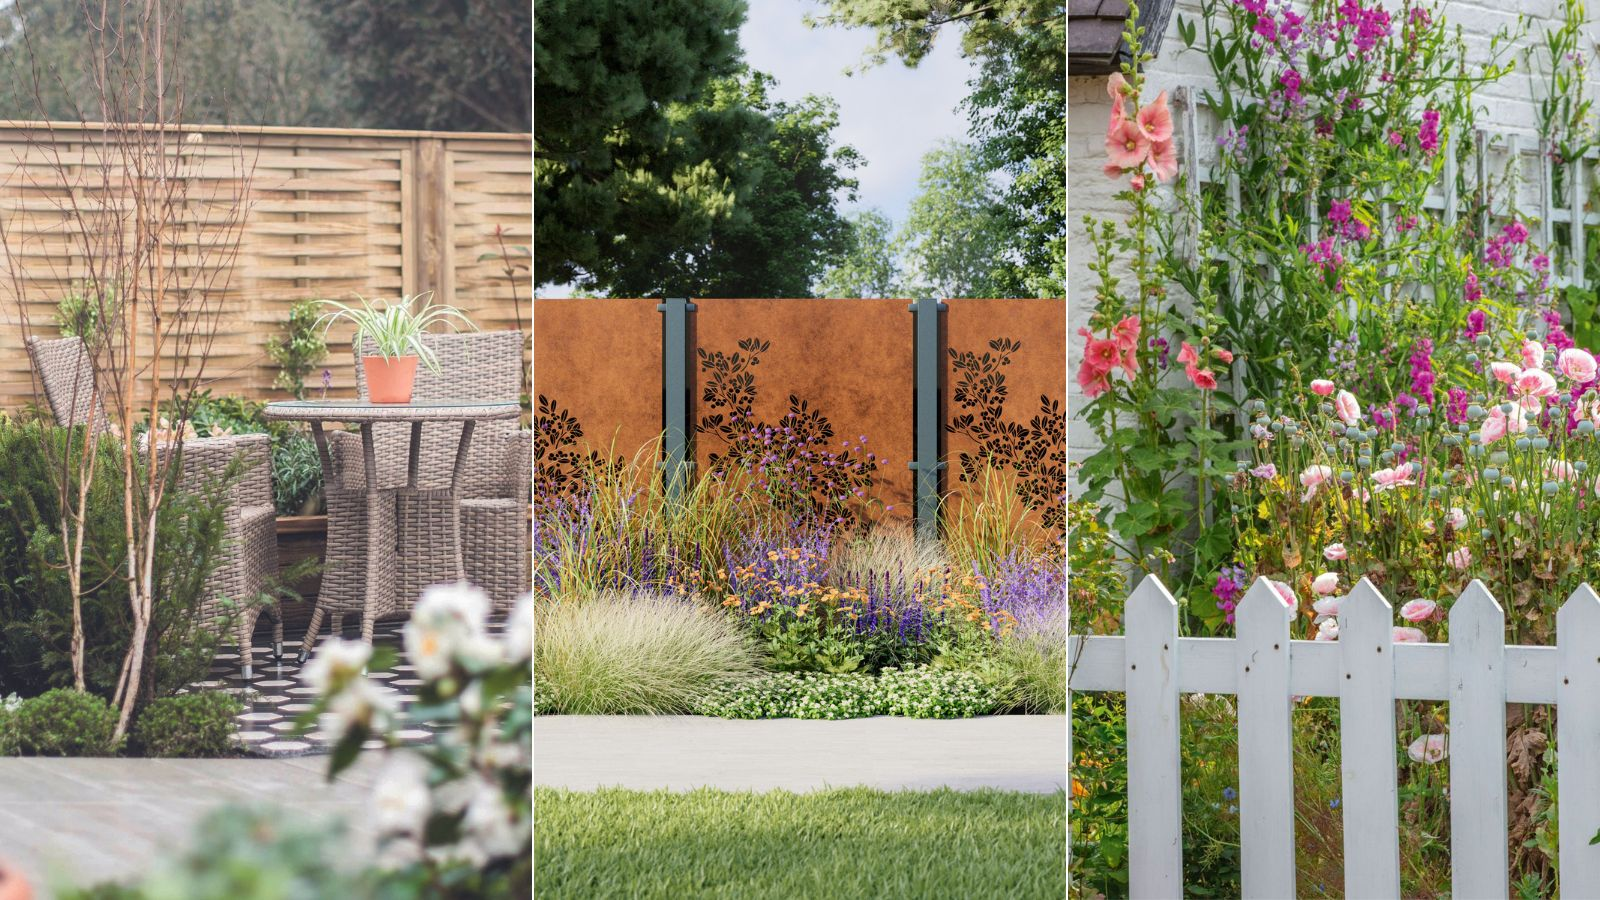 How to Install Fencing to Make Your Garden Beautiful